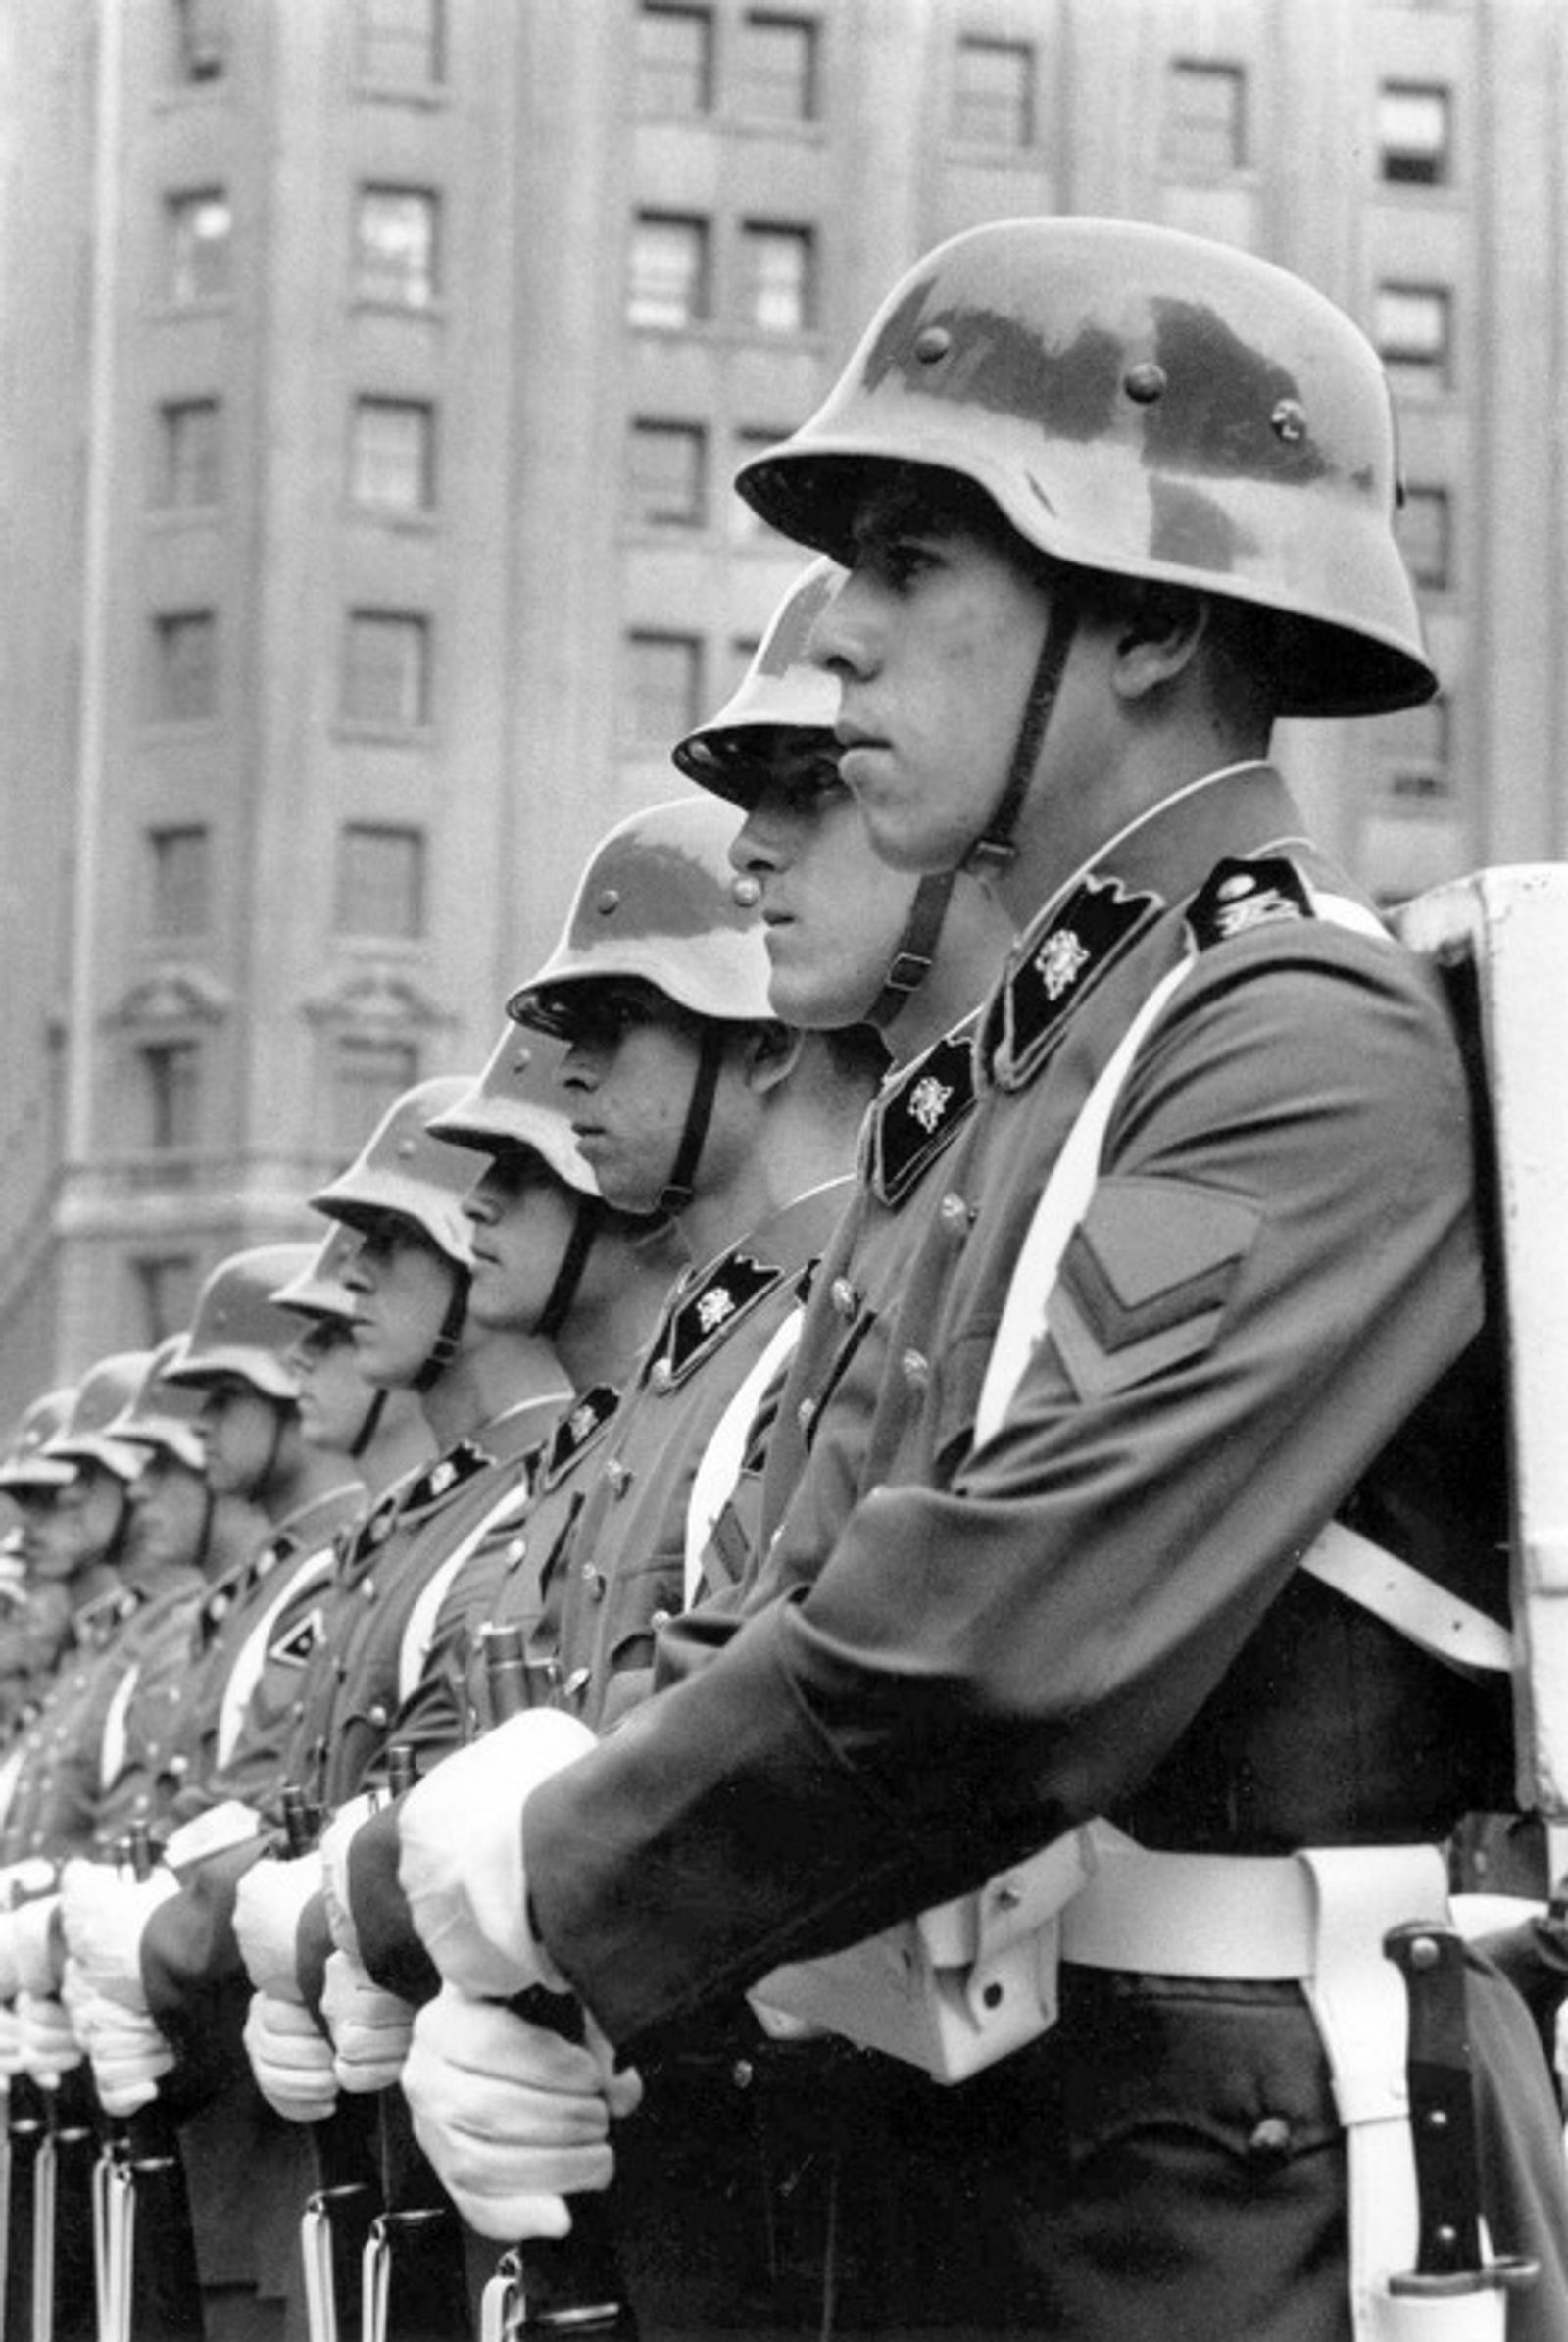 © Julio Etchart - Soldiers on parade displaying Nazi-style helmets during the Pinochet era